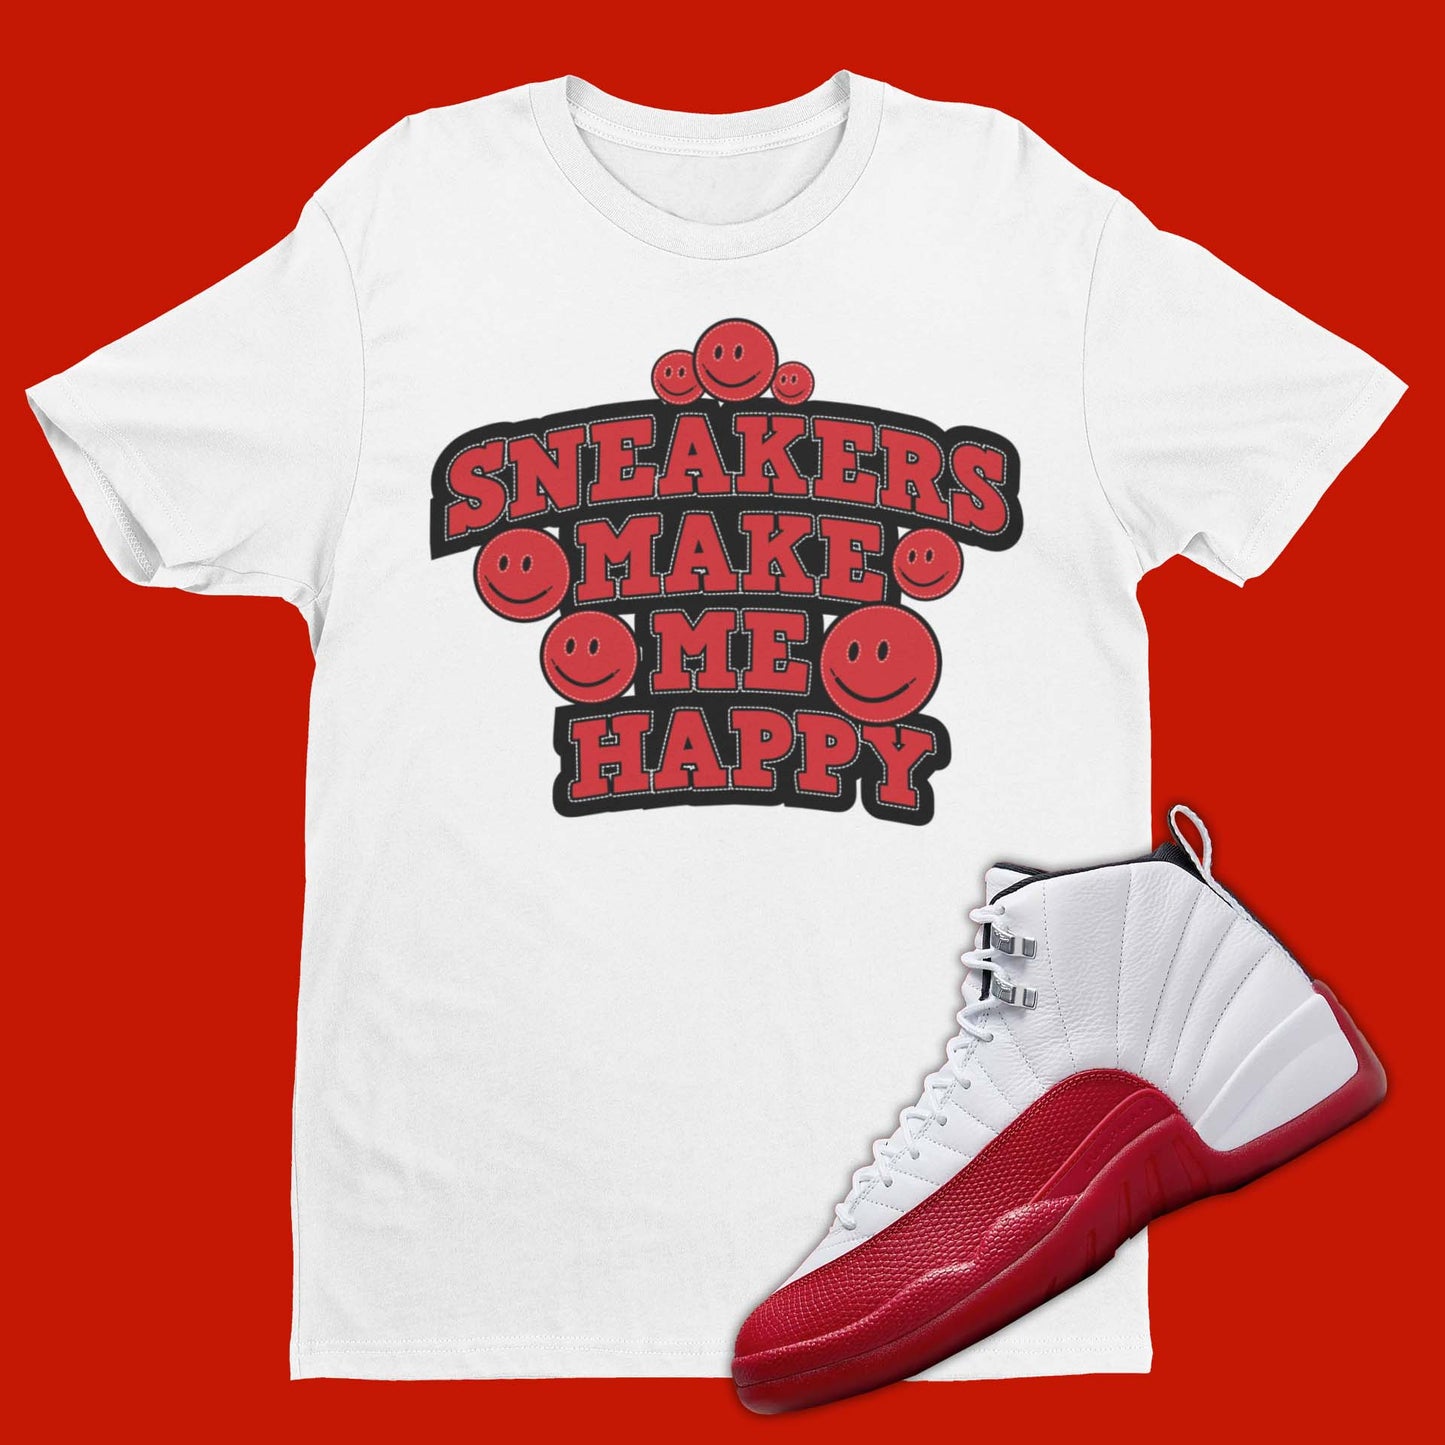 Sneakers Make Me Happy Smiley Face Air Jordan 12 Cherry Matching T-Shirt from SNKADX